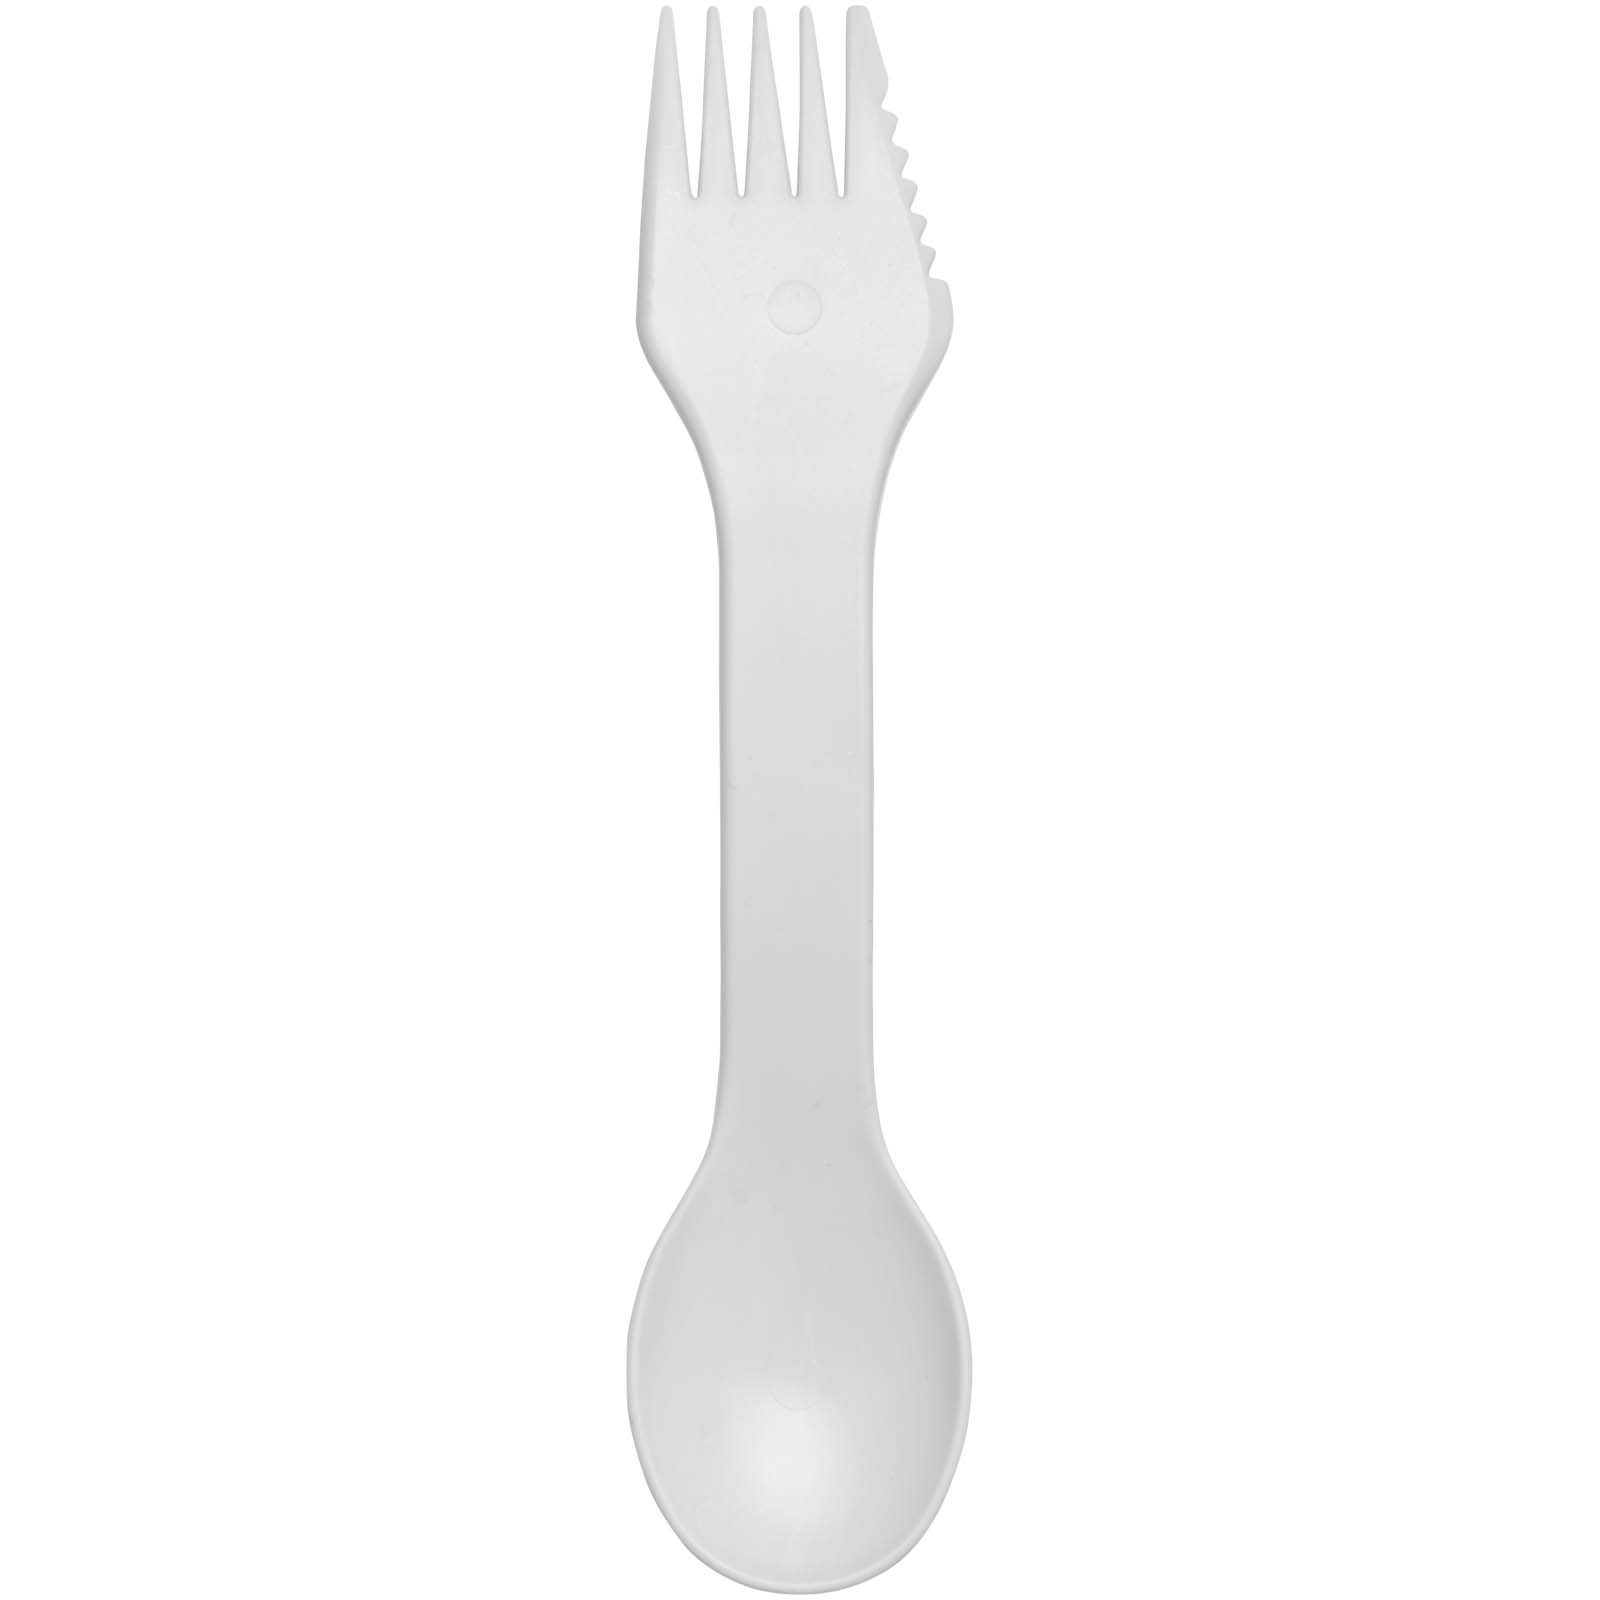 Advertising Home Accessories - Epsy Rise spork - 1